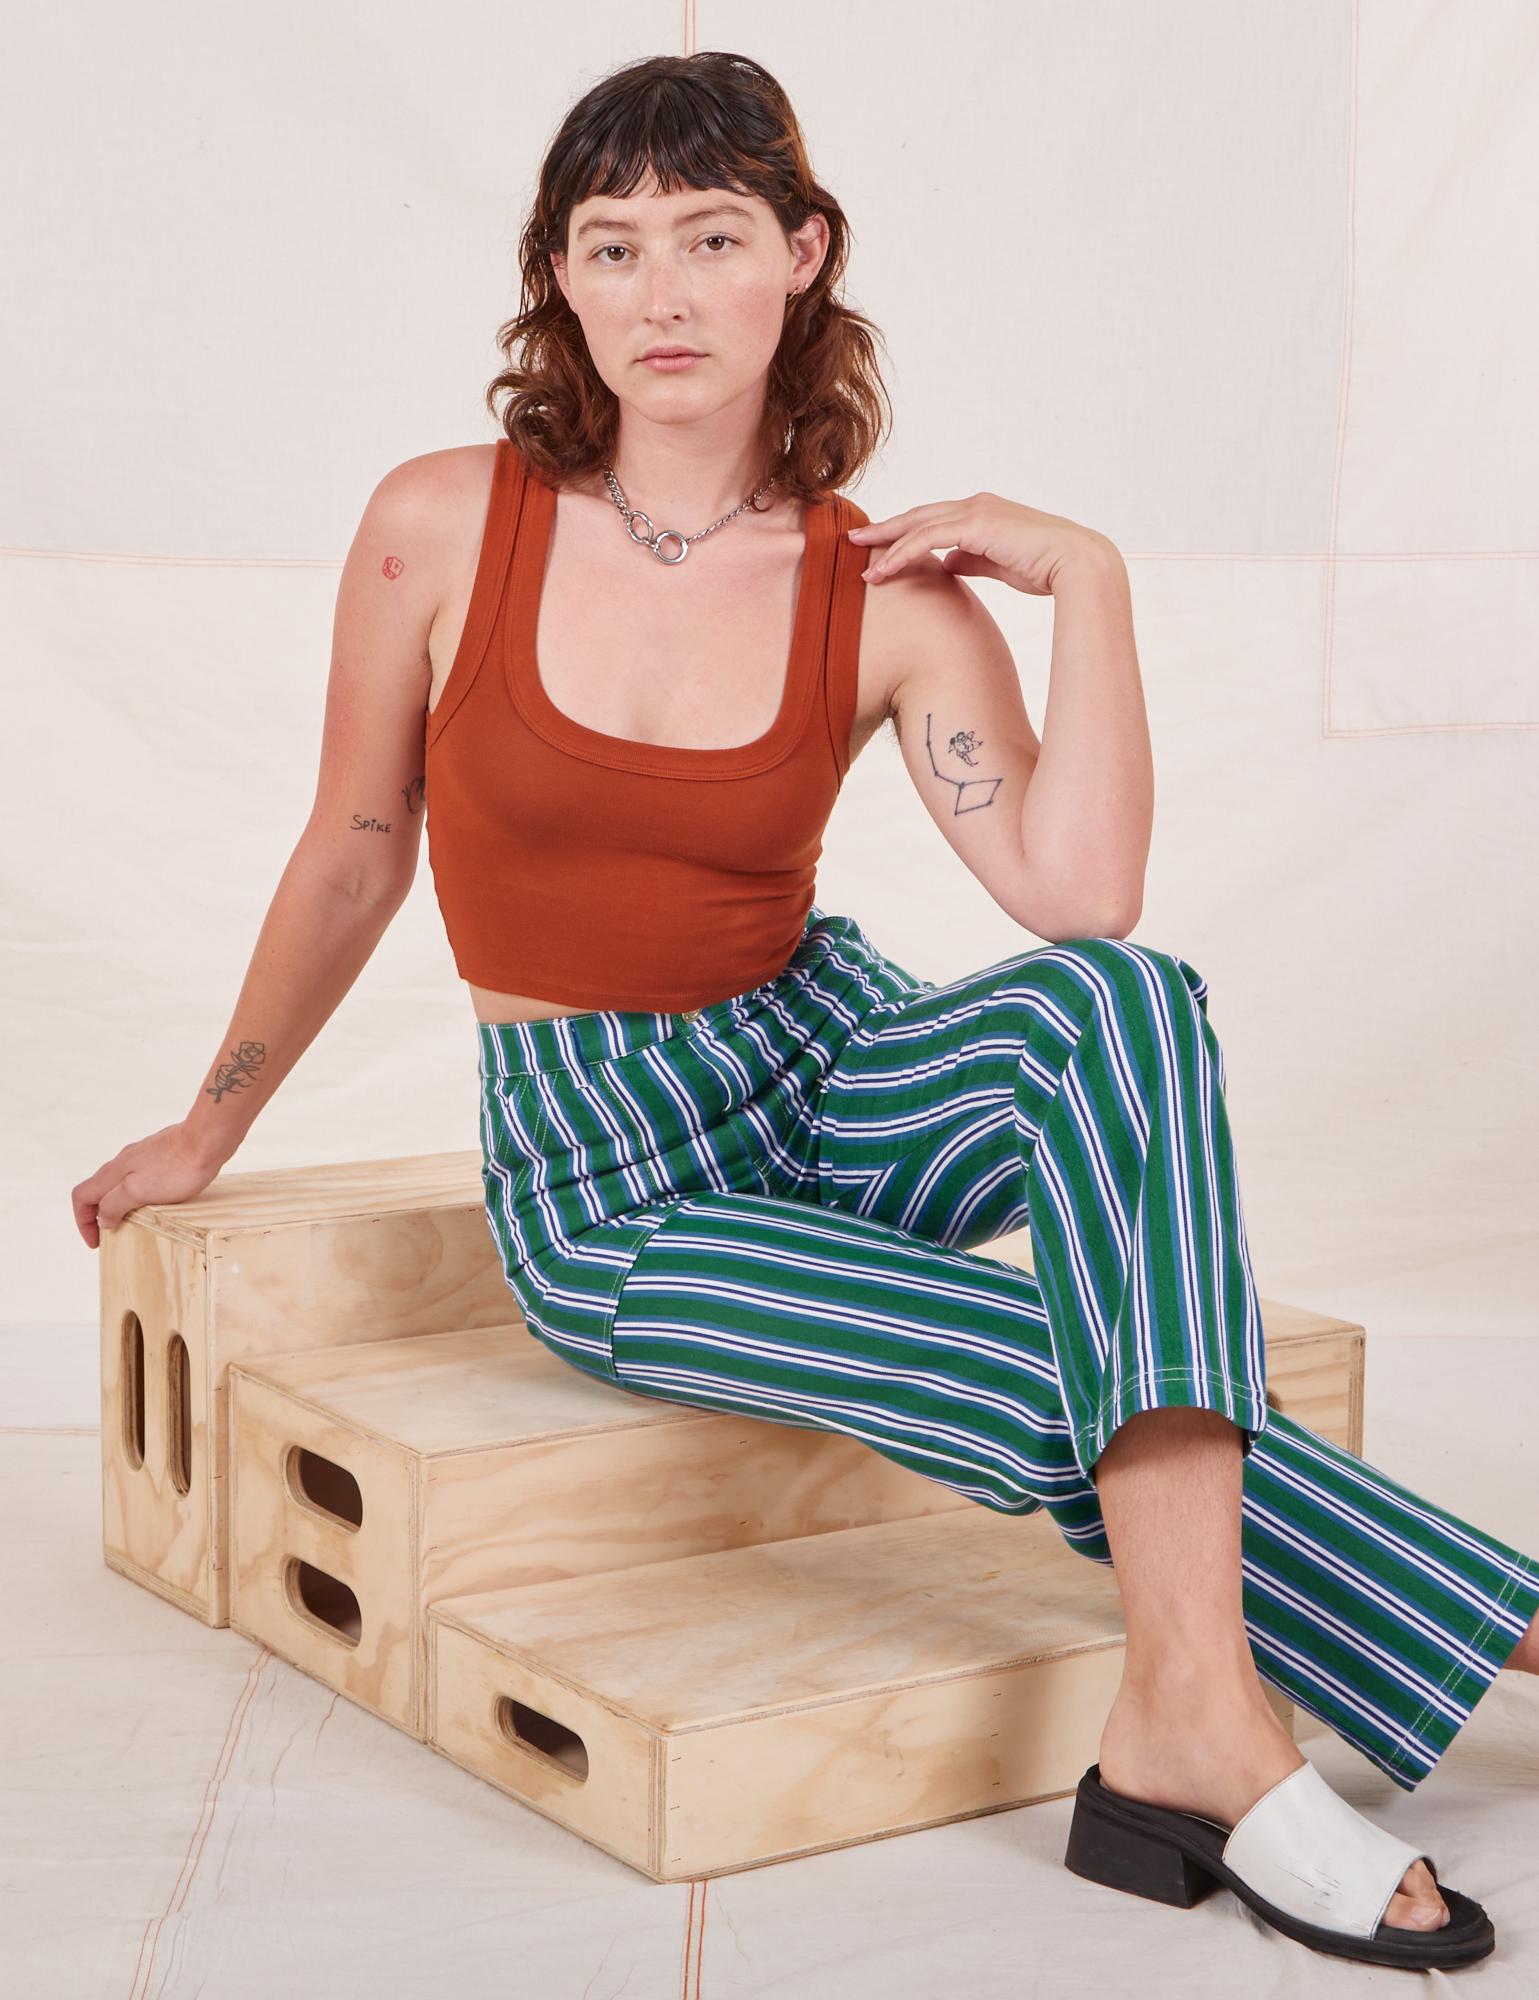 Alex is wearing Stripe Work Pants in Green and burnt terracotta Cropped Tank Top